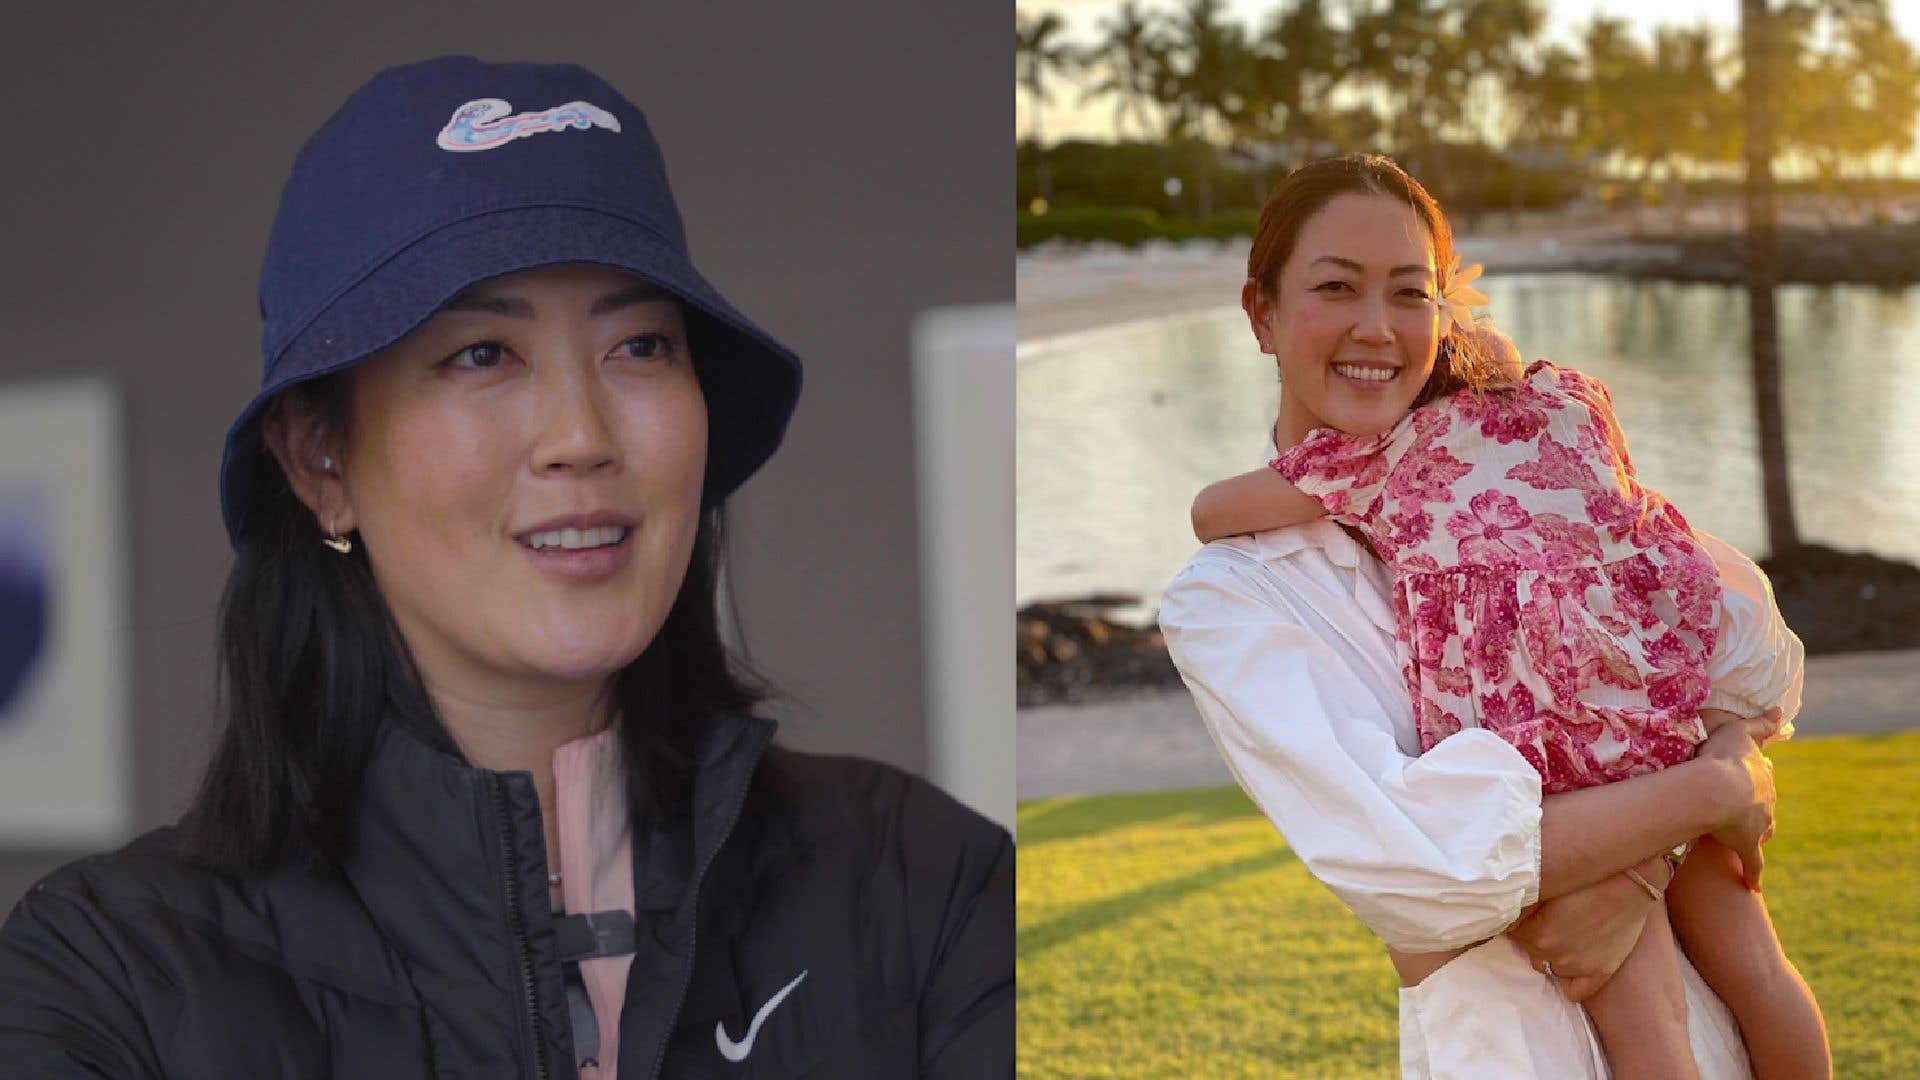 Michelle Wie West reflects on motherhood and her own female role models